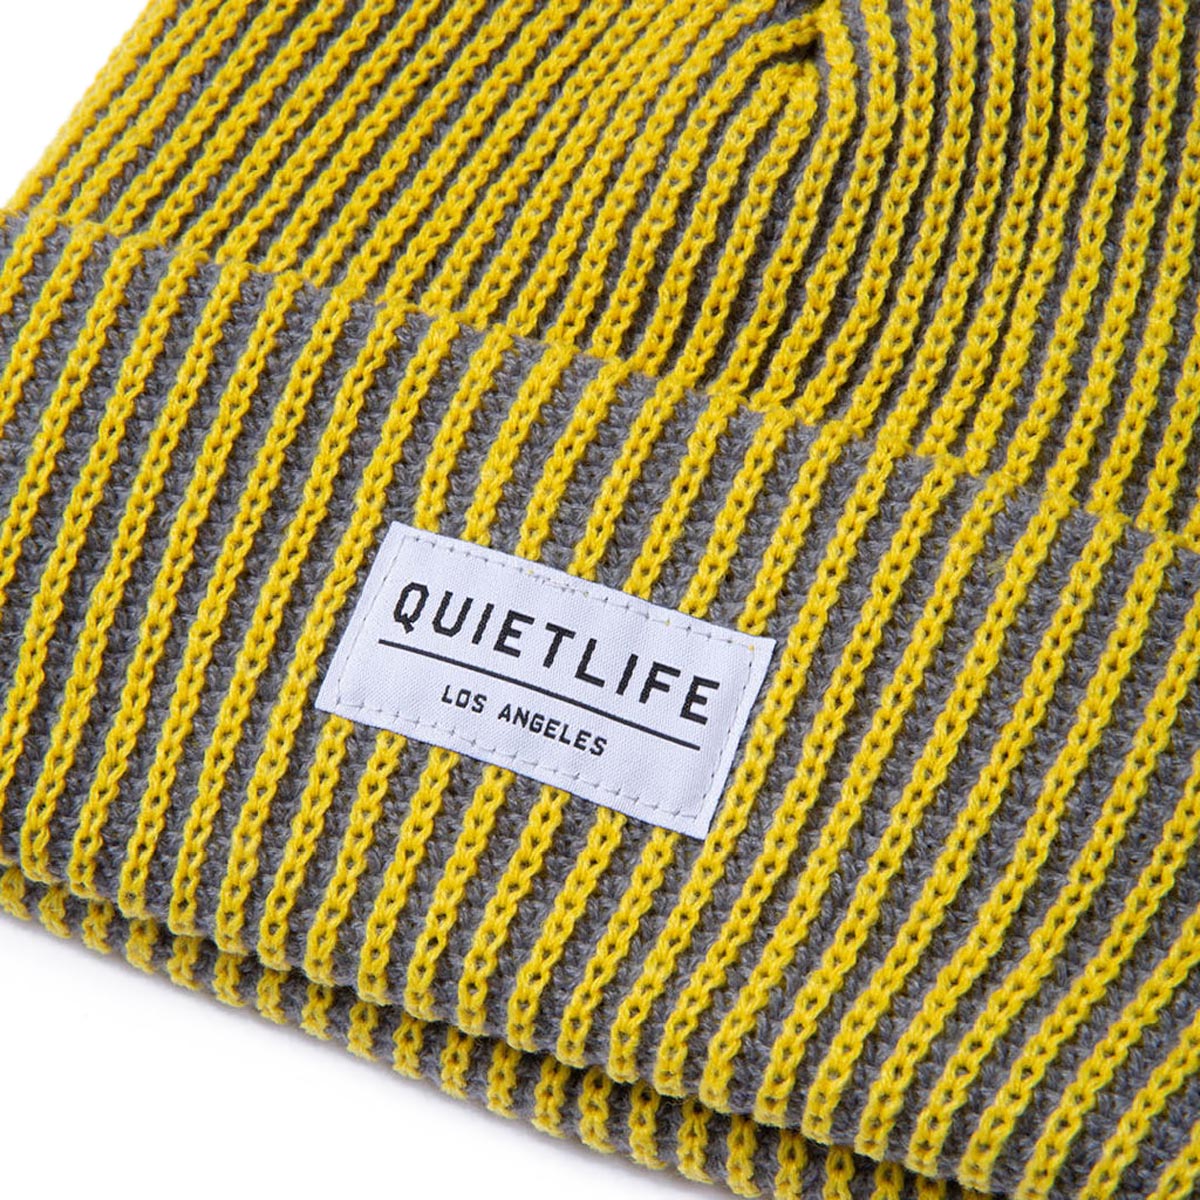 The Quiet Life Vertical Beanie - Yellow/Grey image 2